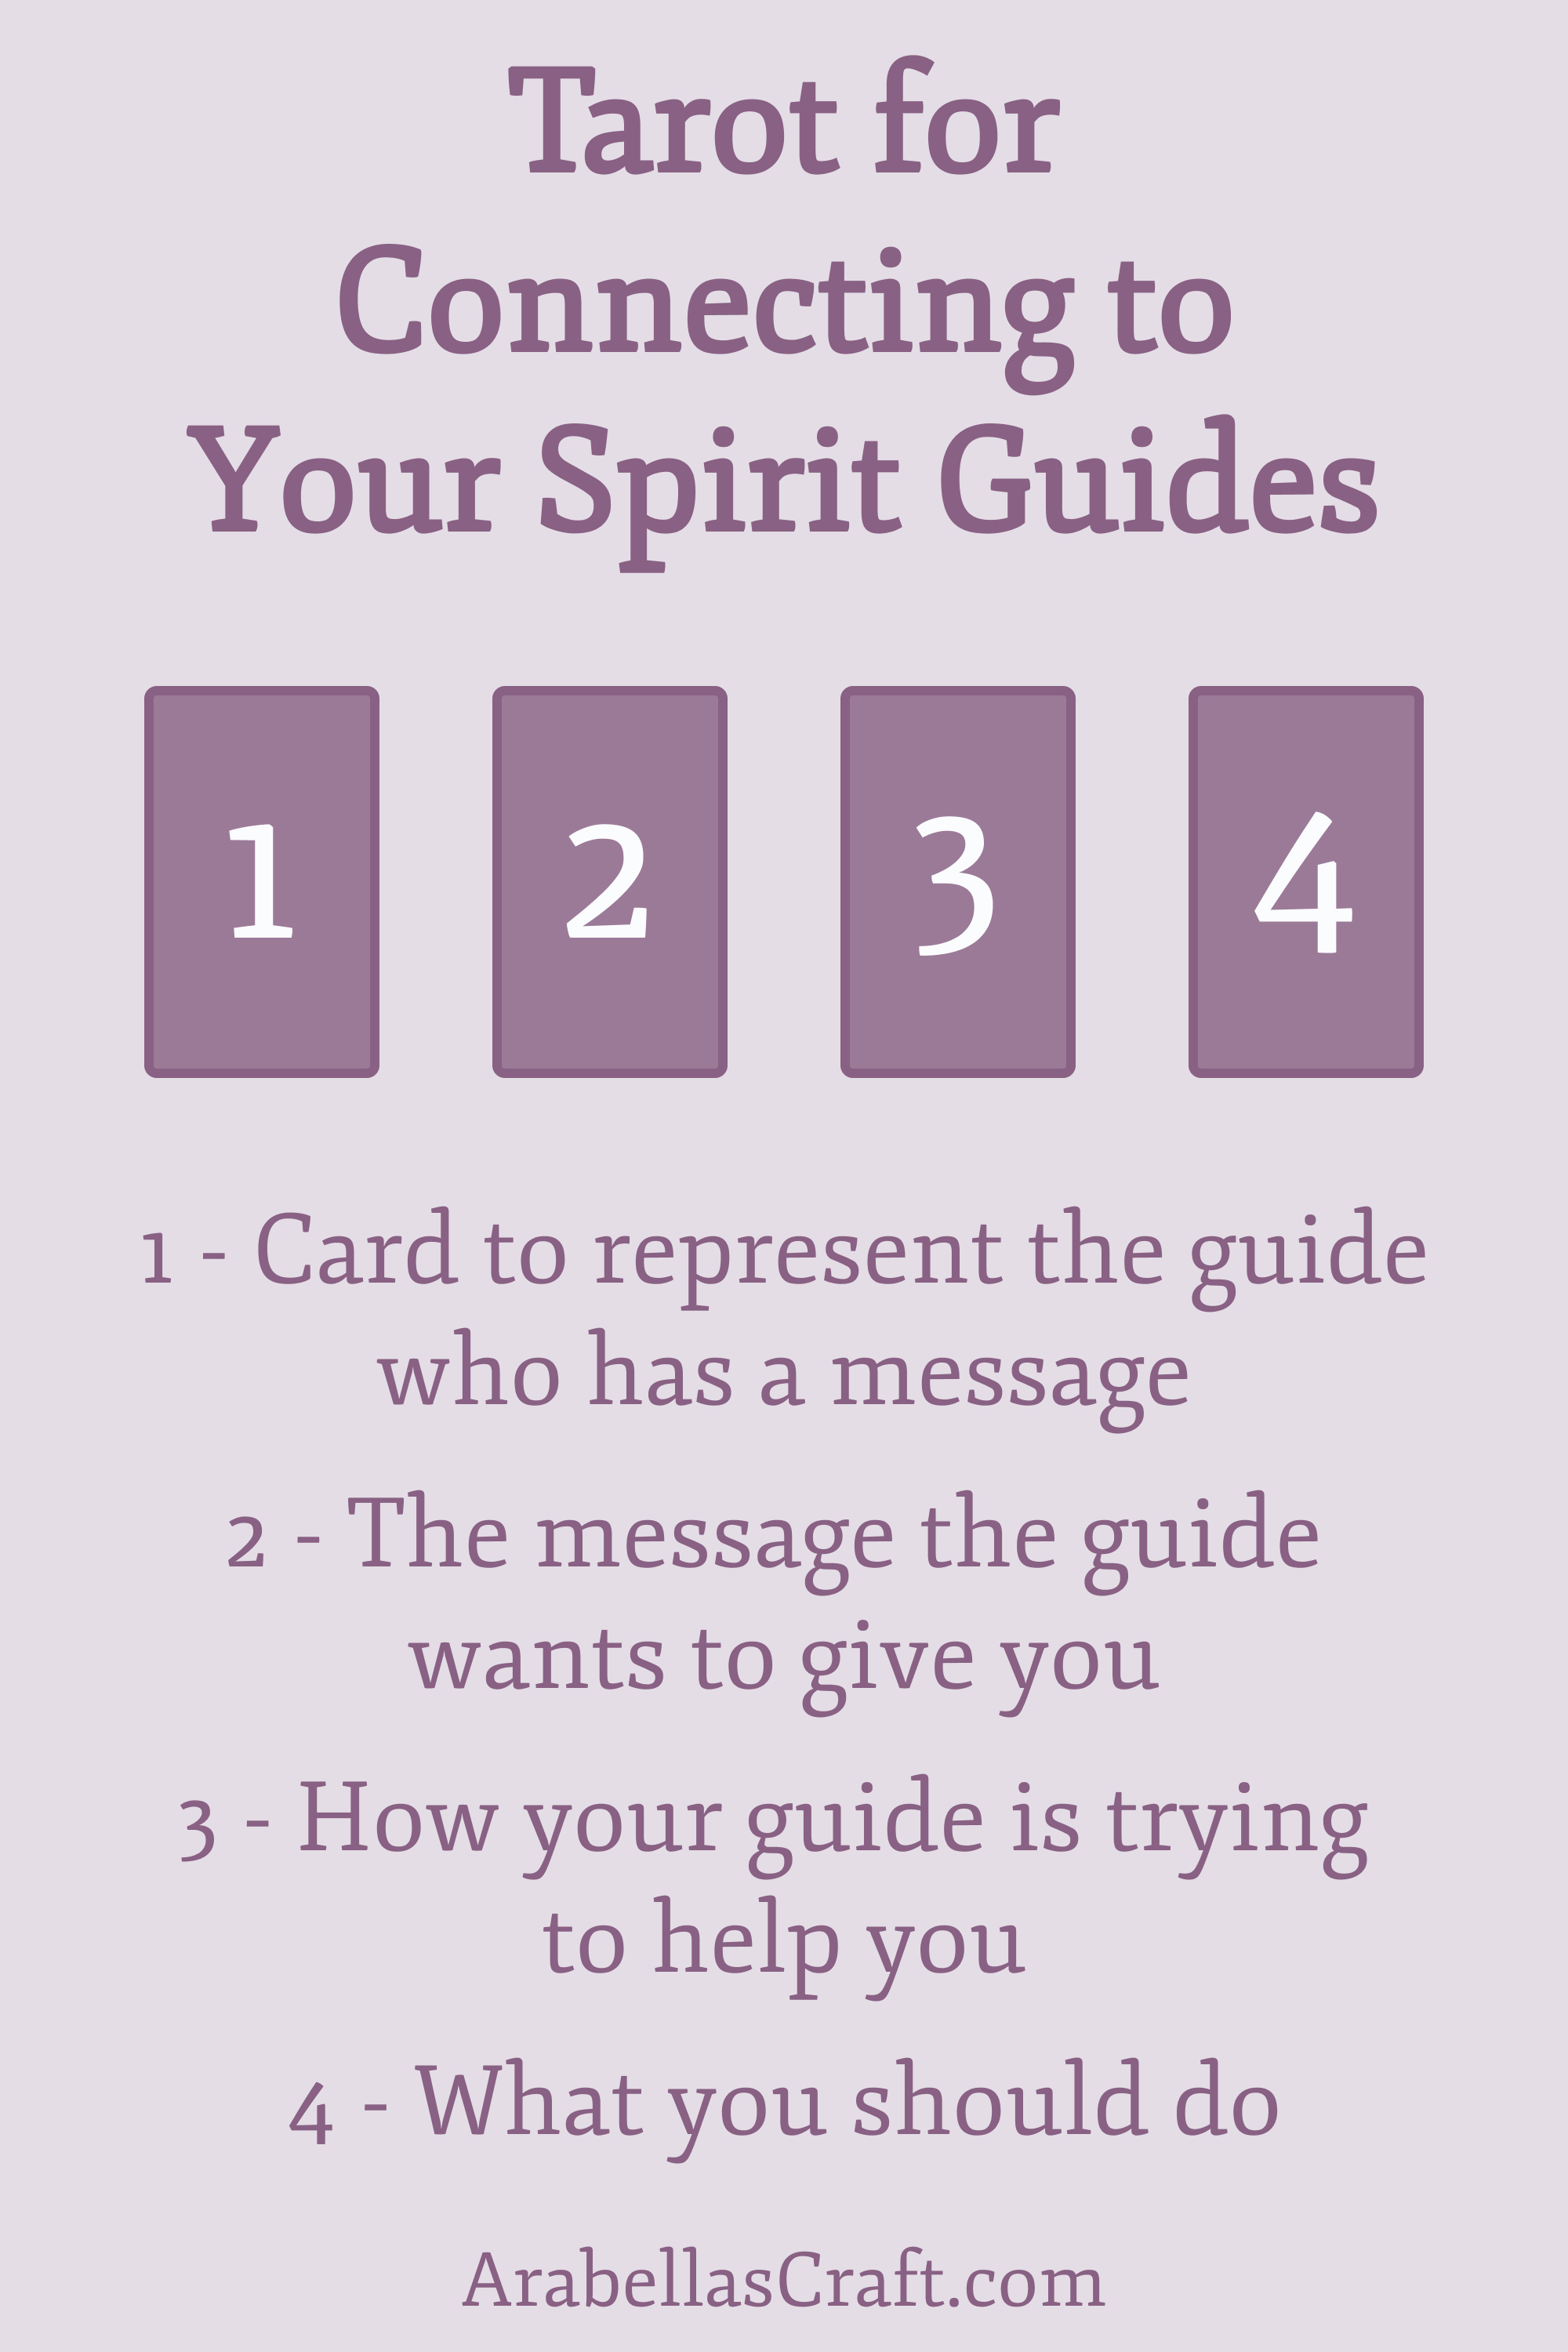 Tarot for Connecting with Spirit Guides